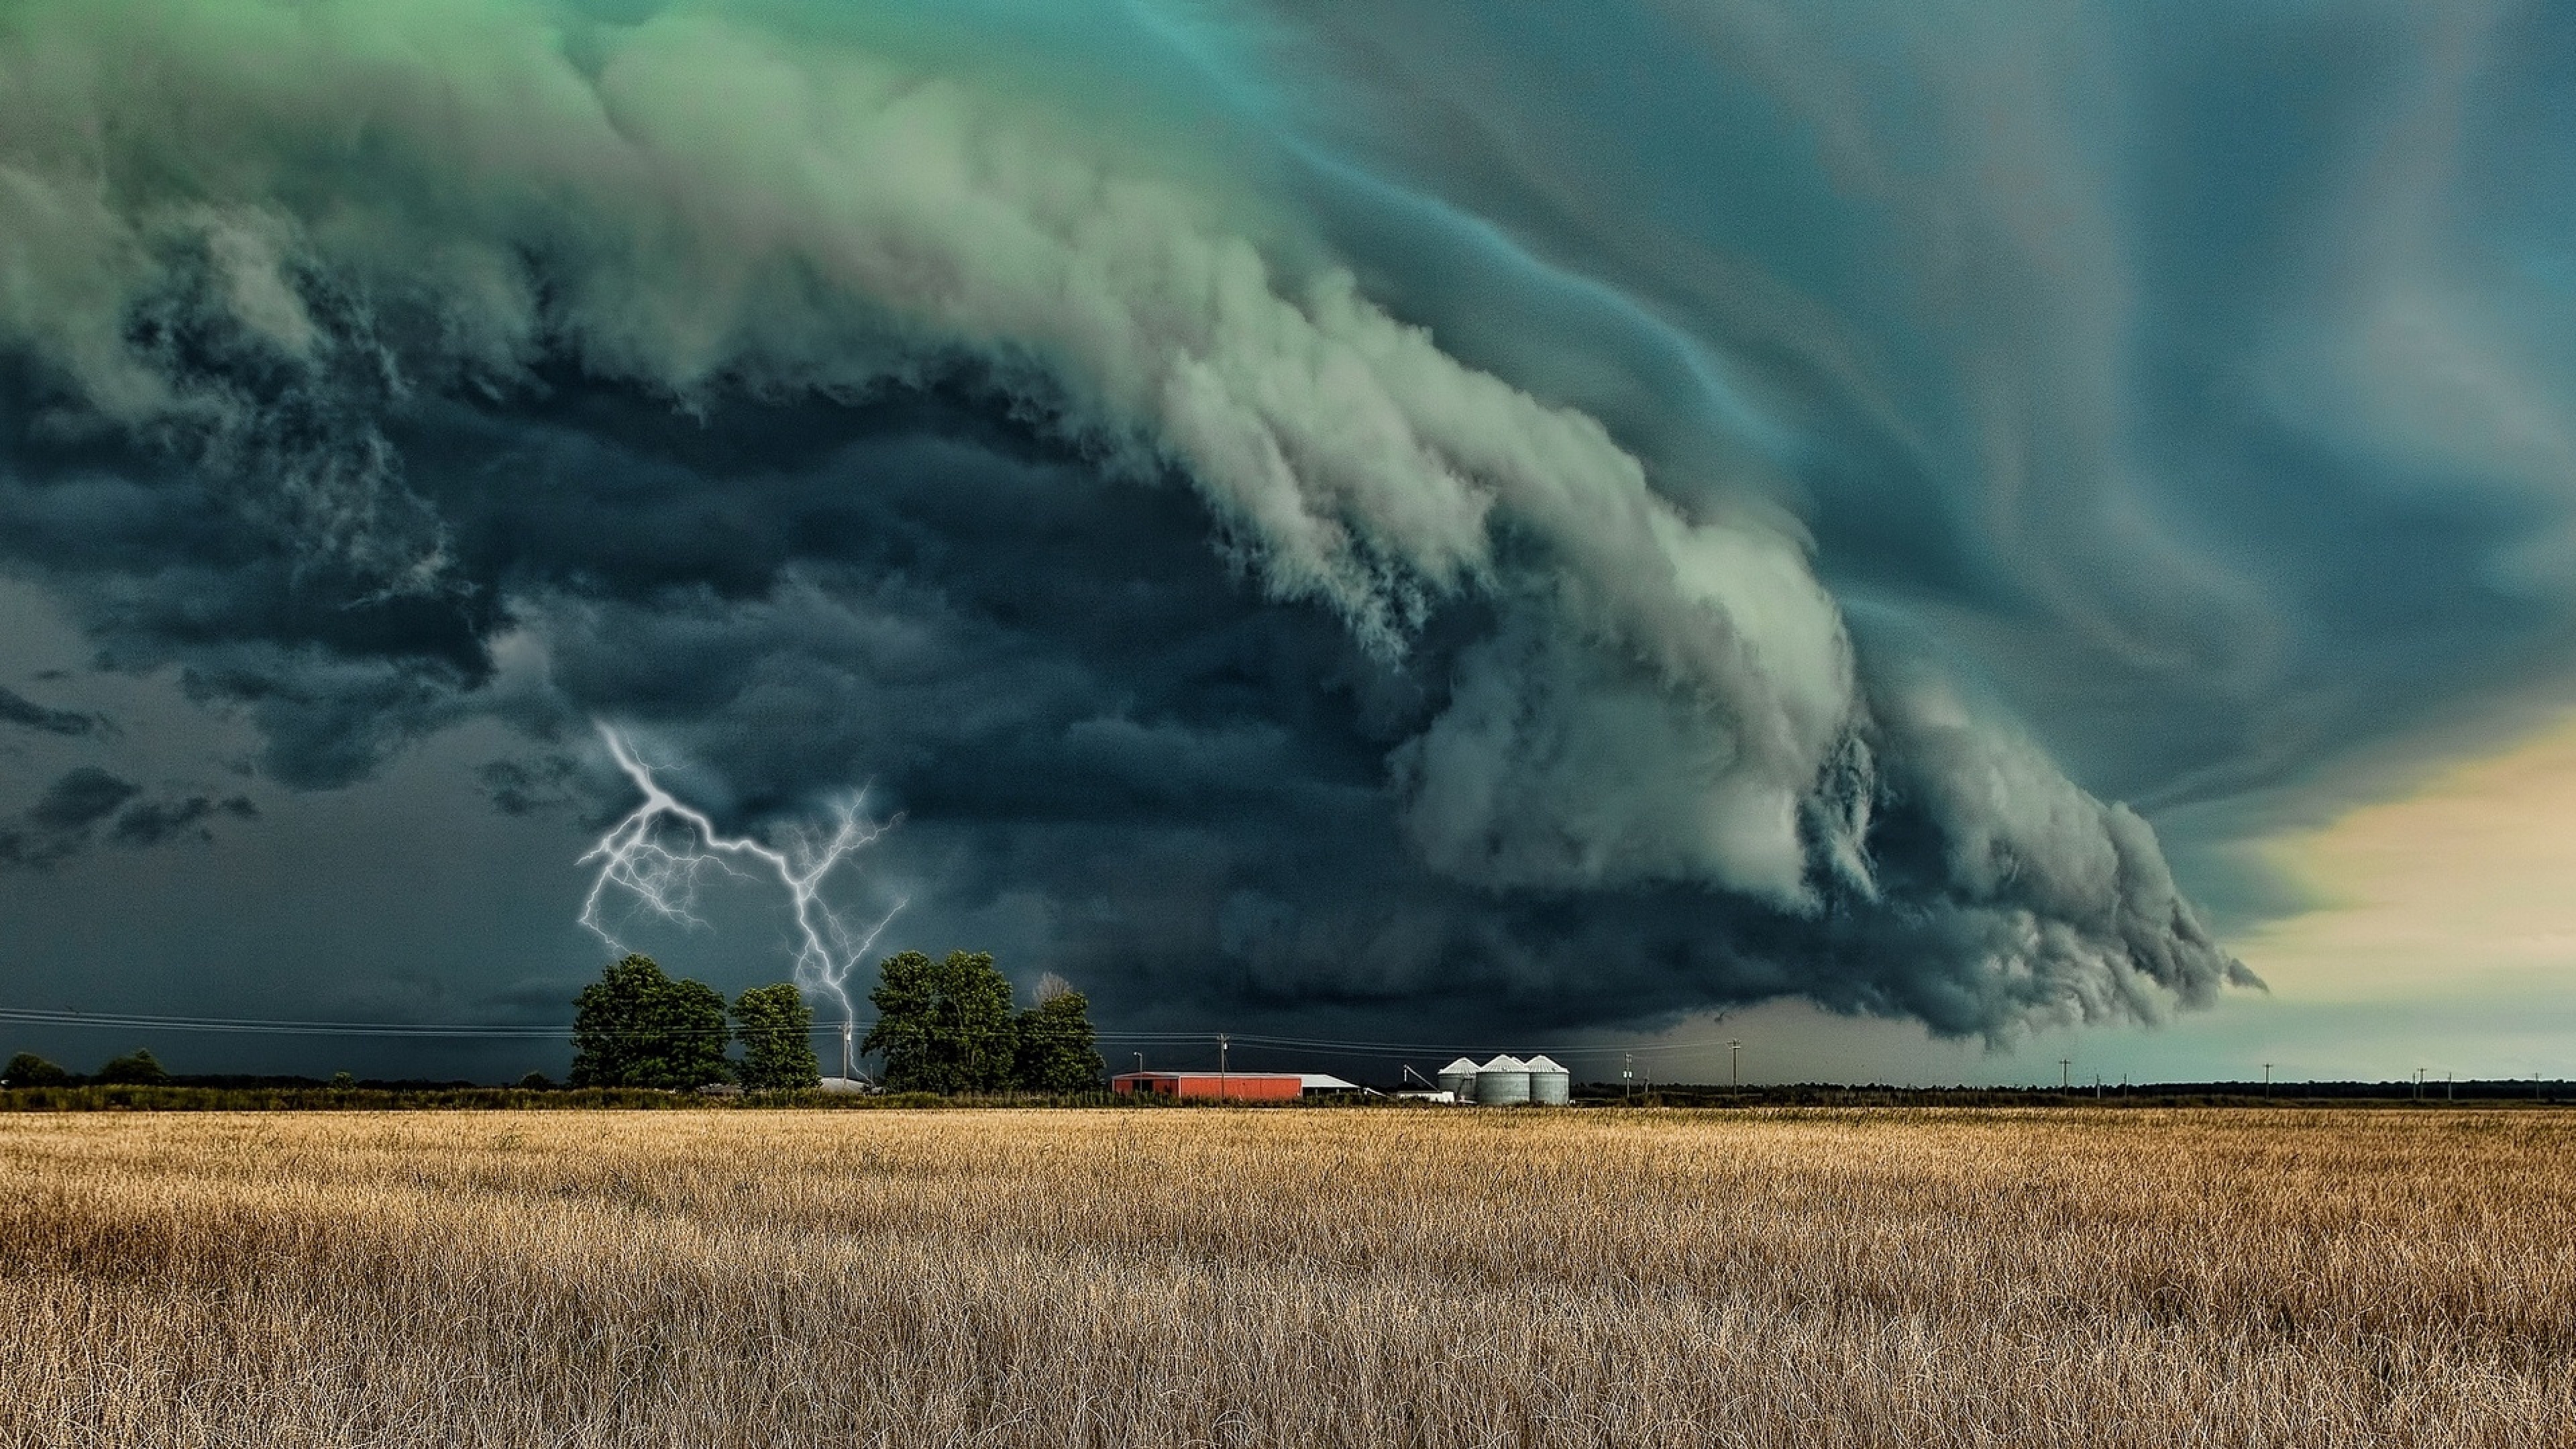 tornado_lightning_category_field_bad_weather_constructions_wires_61189_3840x2160.jpg